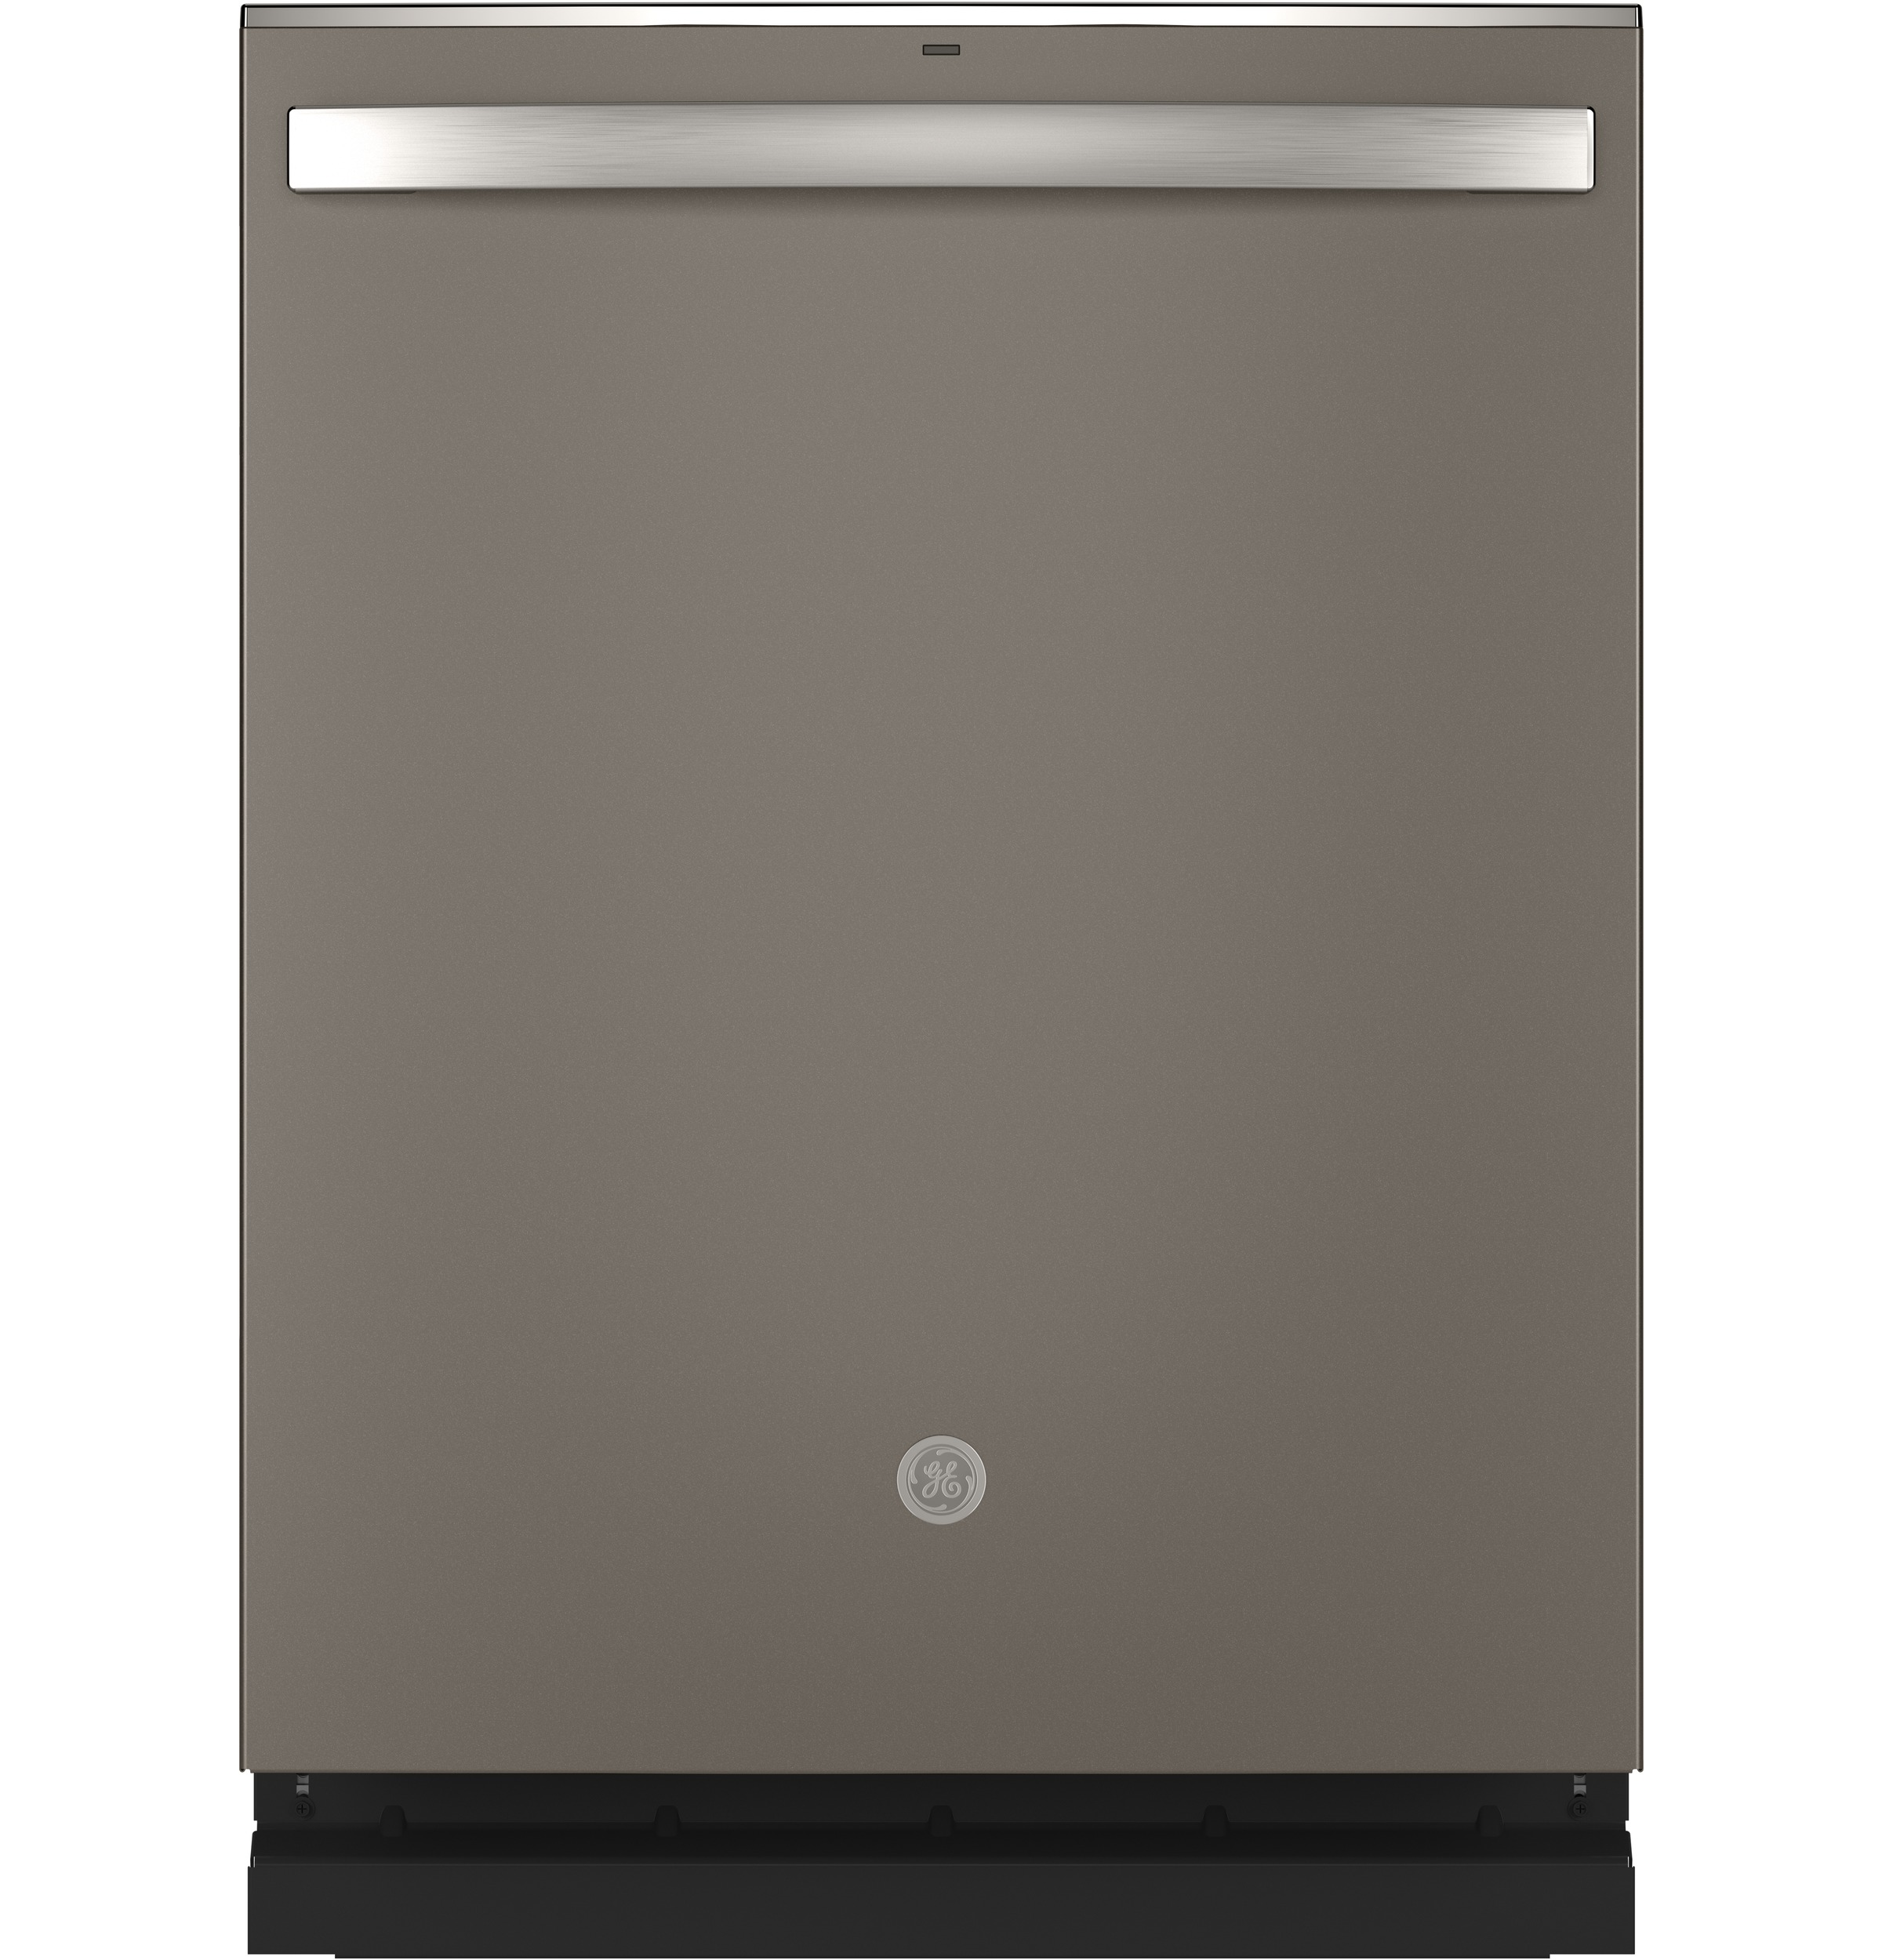 Ge® Gdt665smnes Slate Dishwasher With Hidden Controls And Stainless Steel